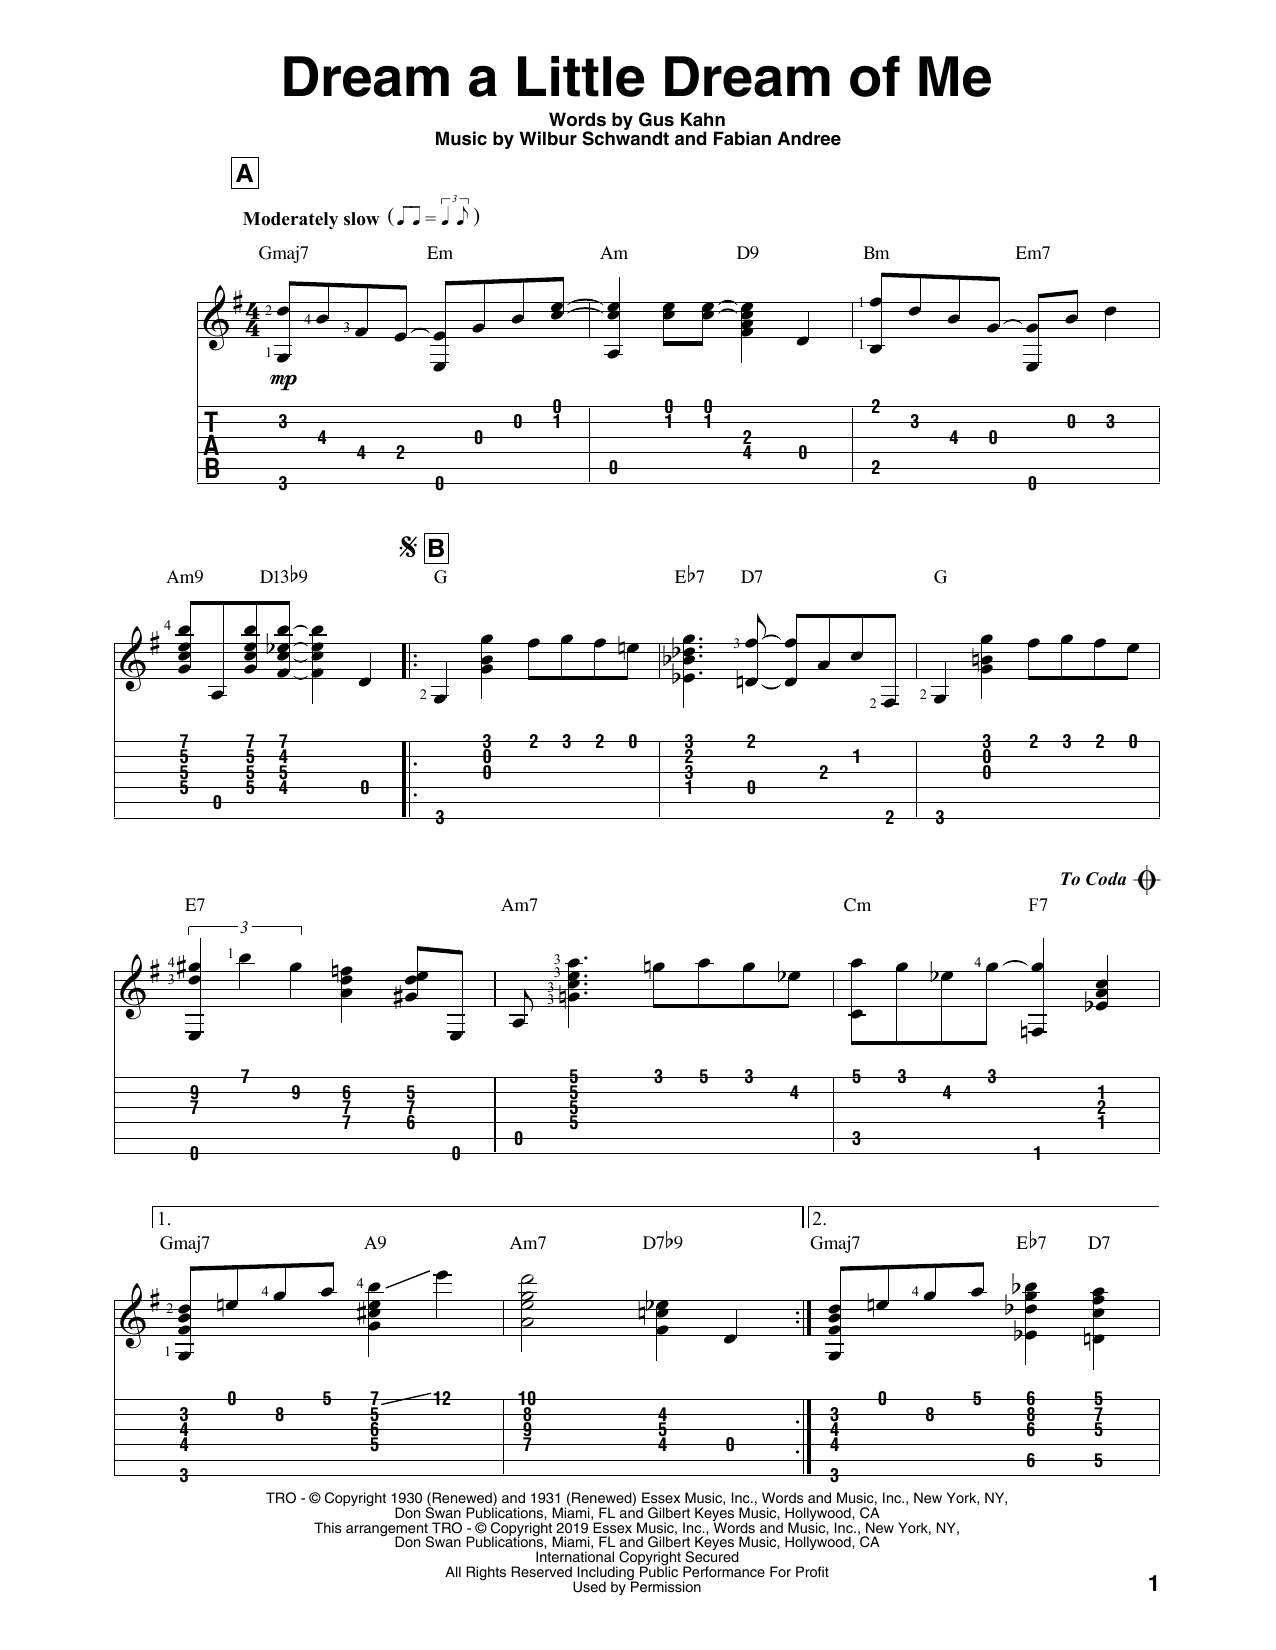 Download The Mamas & The Papas Dream A Little Dream Of Me Sheet Music